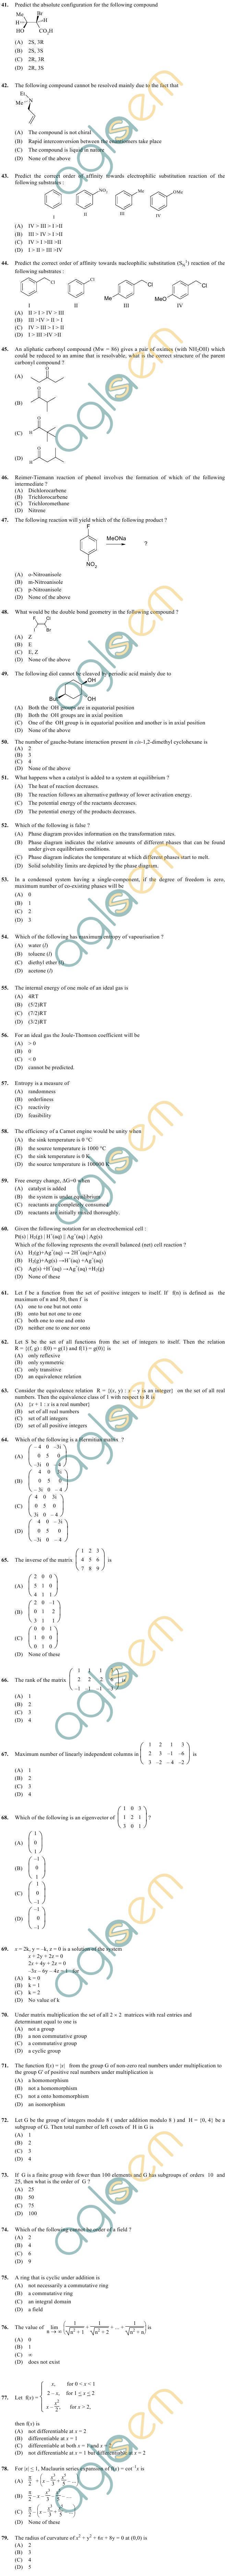 OJEE 2013 Question Paper for LE BSC PCM